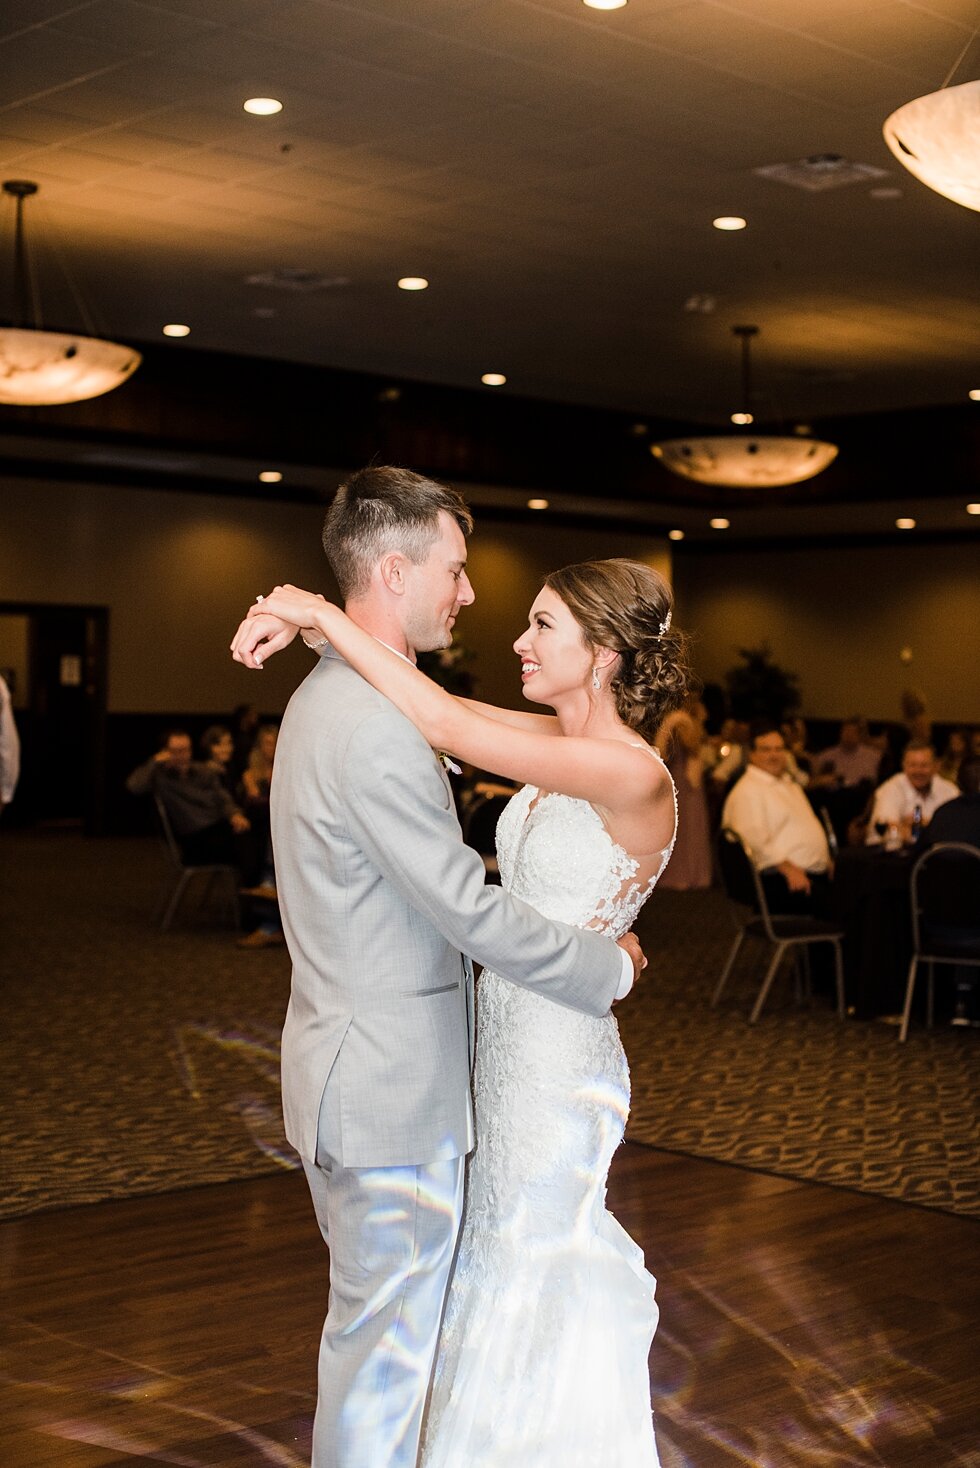  Swaying side to side, the bride and groom share their first dance together during their wedding reception. wedding ceremony details stunning photography married midwest louisville kentucky #weddingphoto #love #justmarried #midwestphotographer #kywed